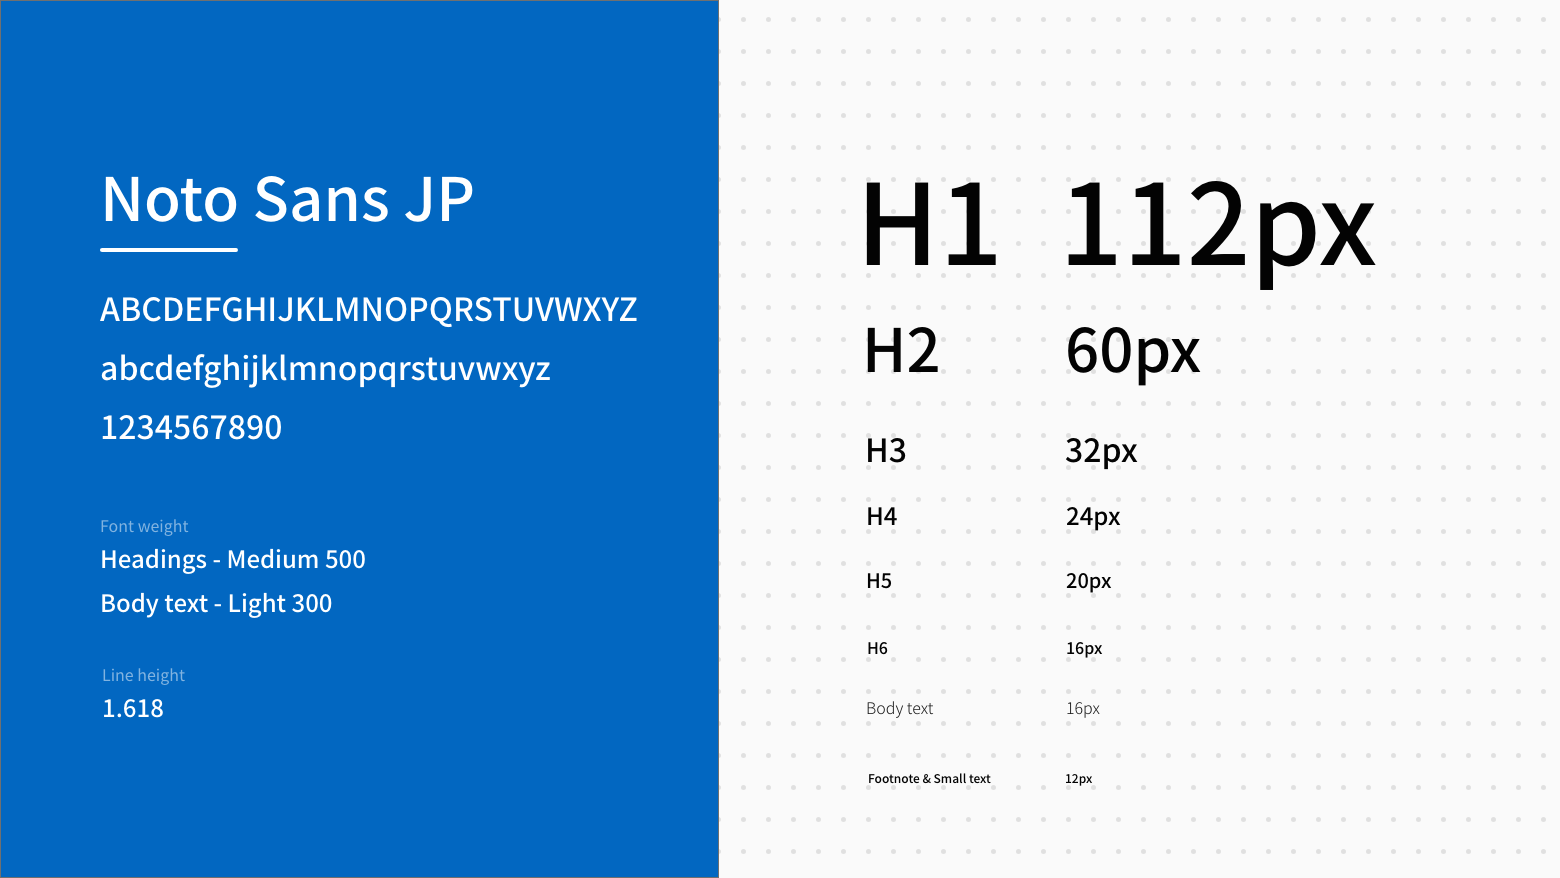 Illustration of Noto Sans JP typeface and font-sizes and weight used.